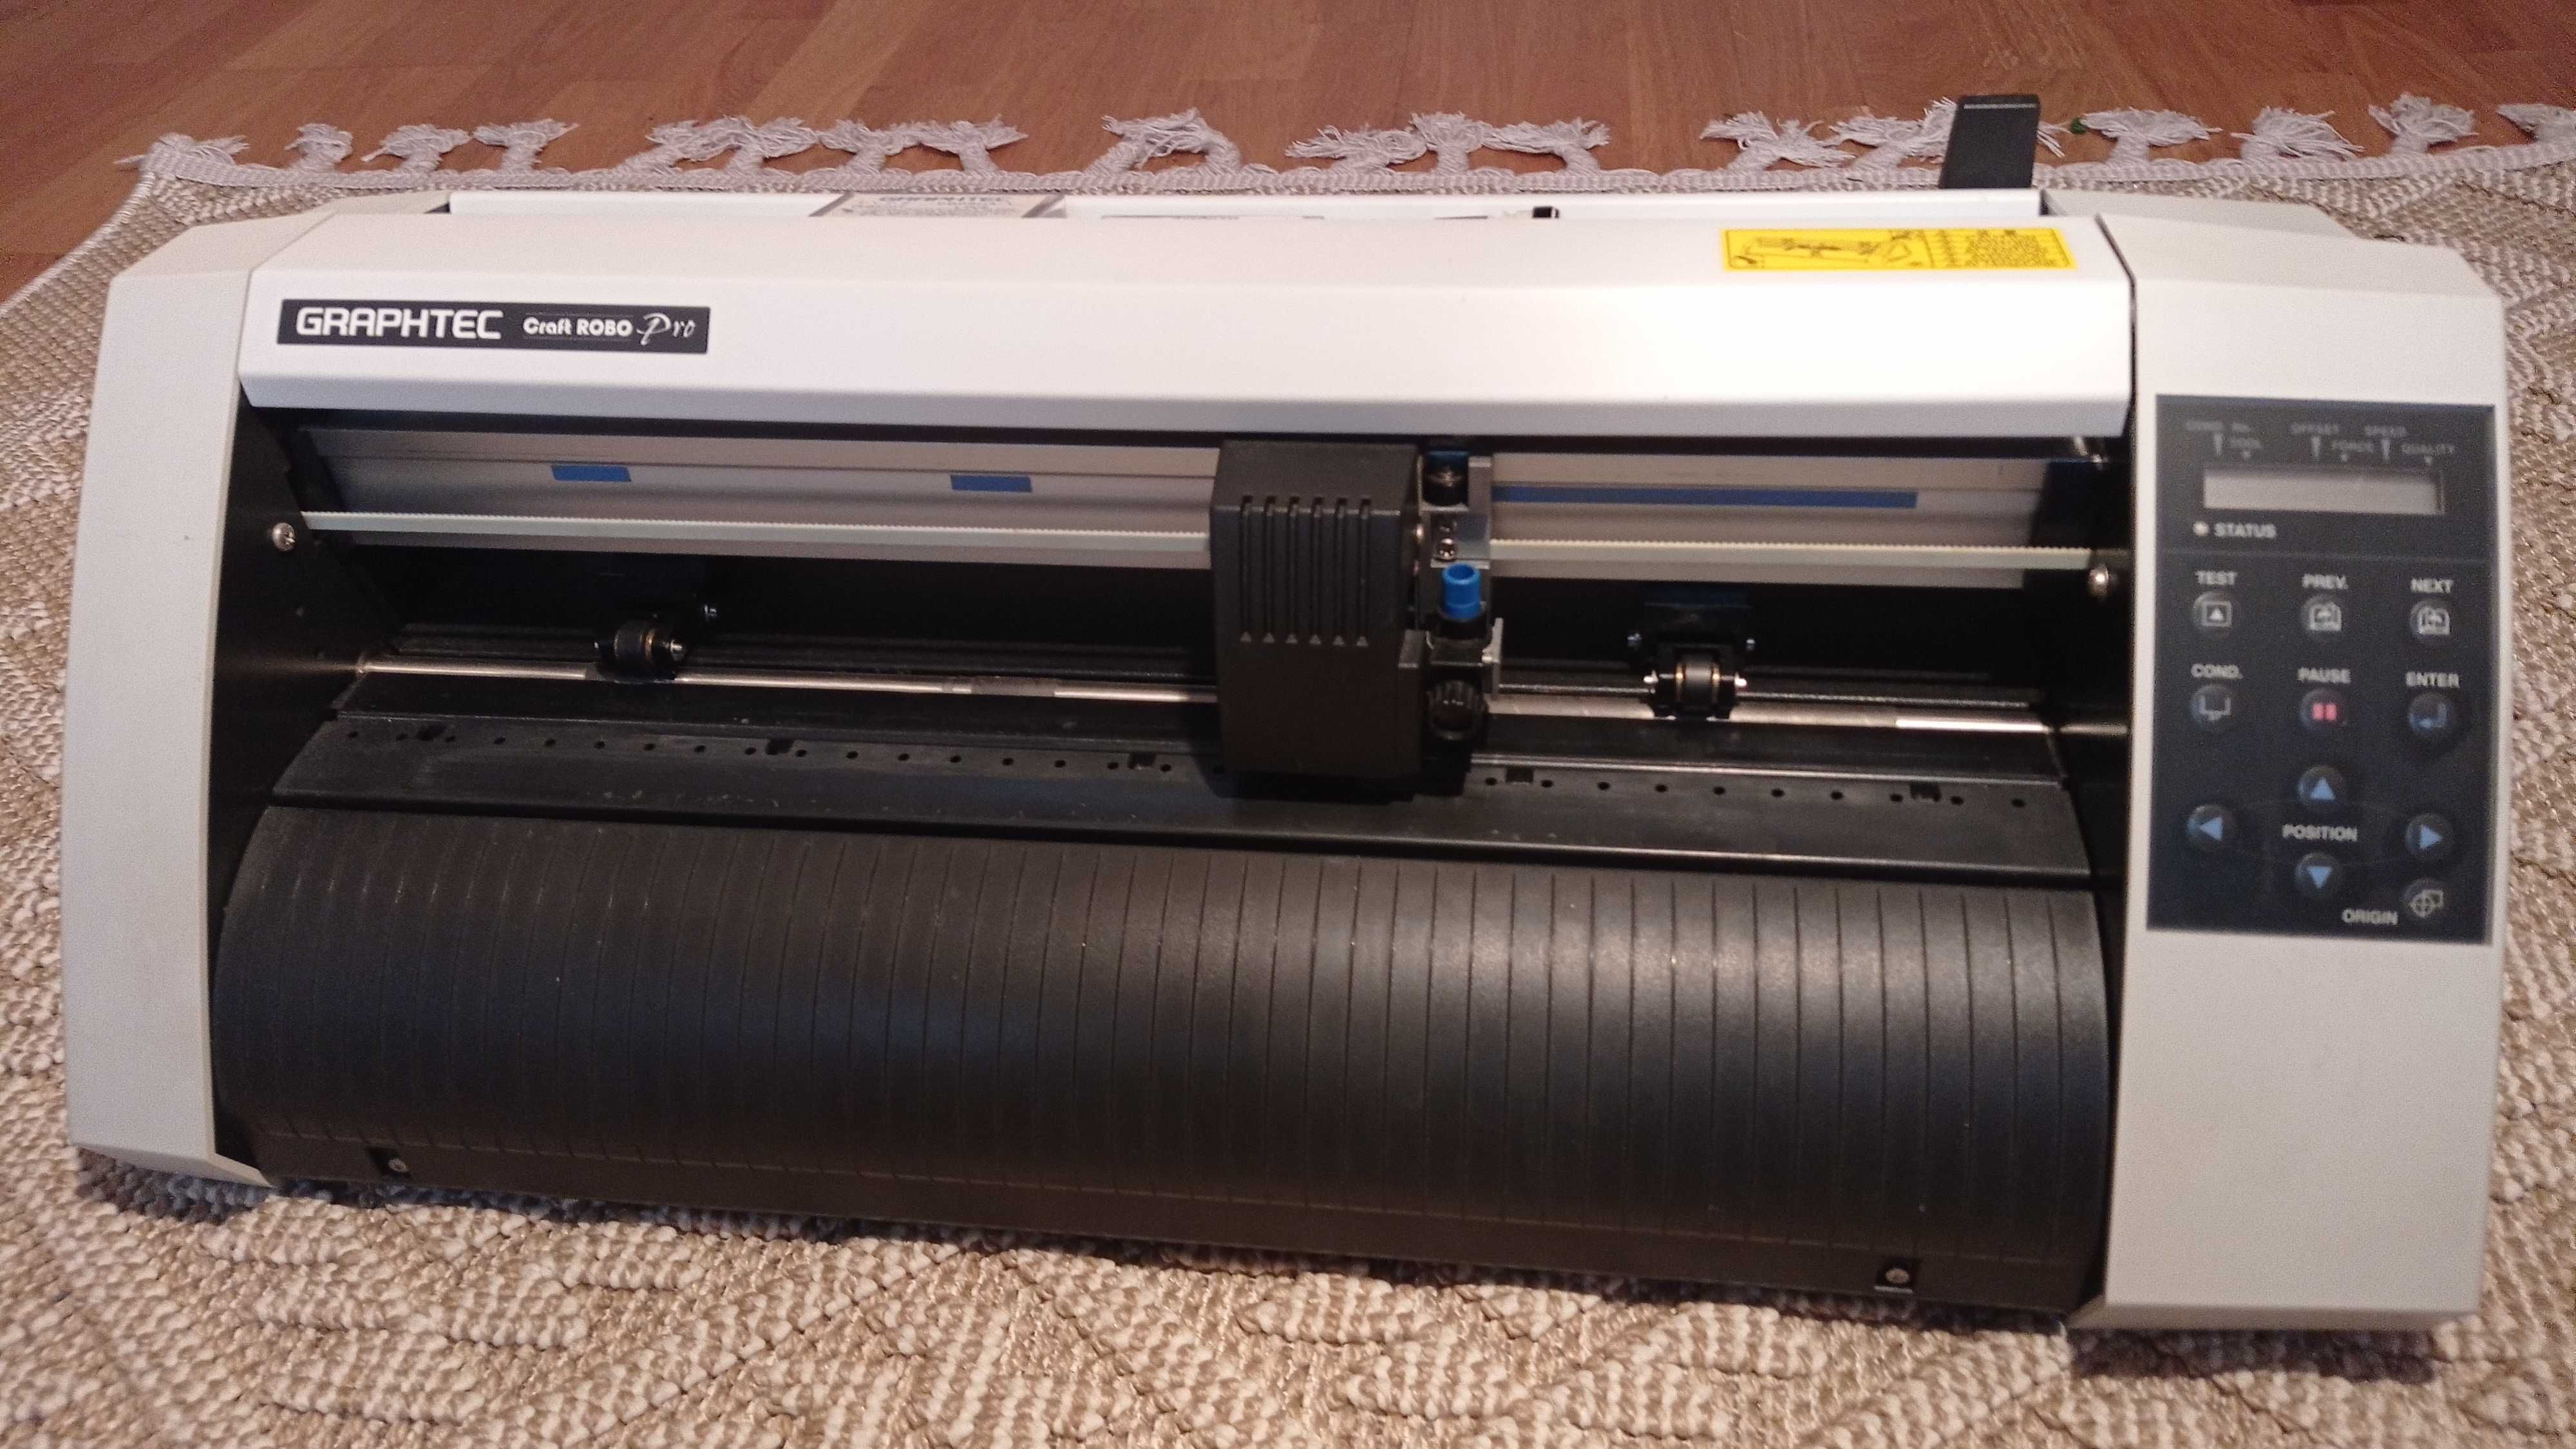 Ploter Graphtec Made in Japan
RoboPro CE5000-40-CRP